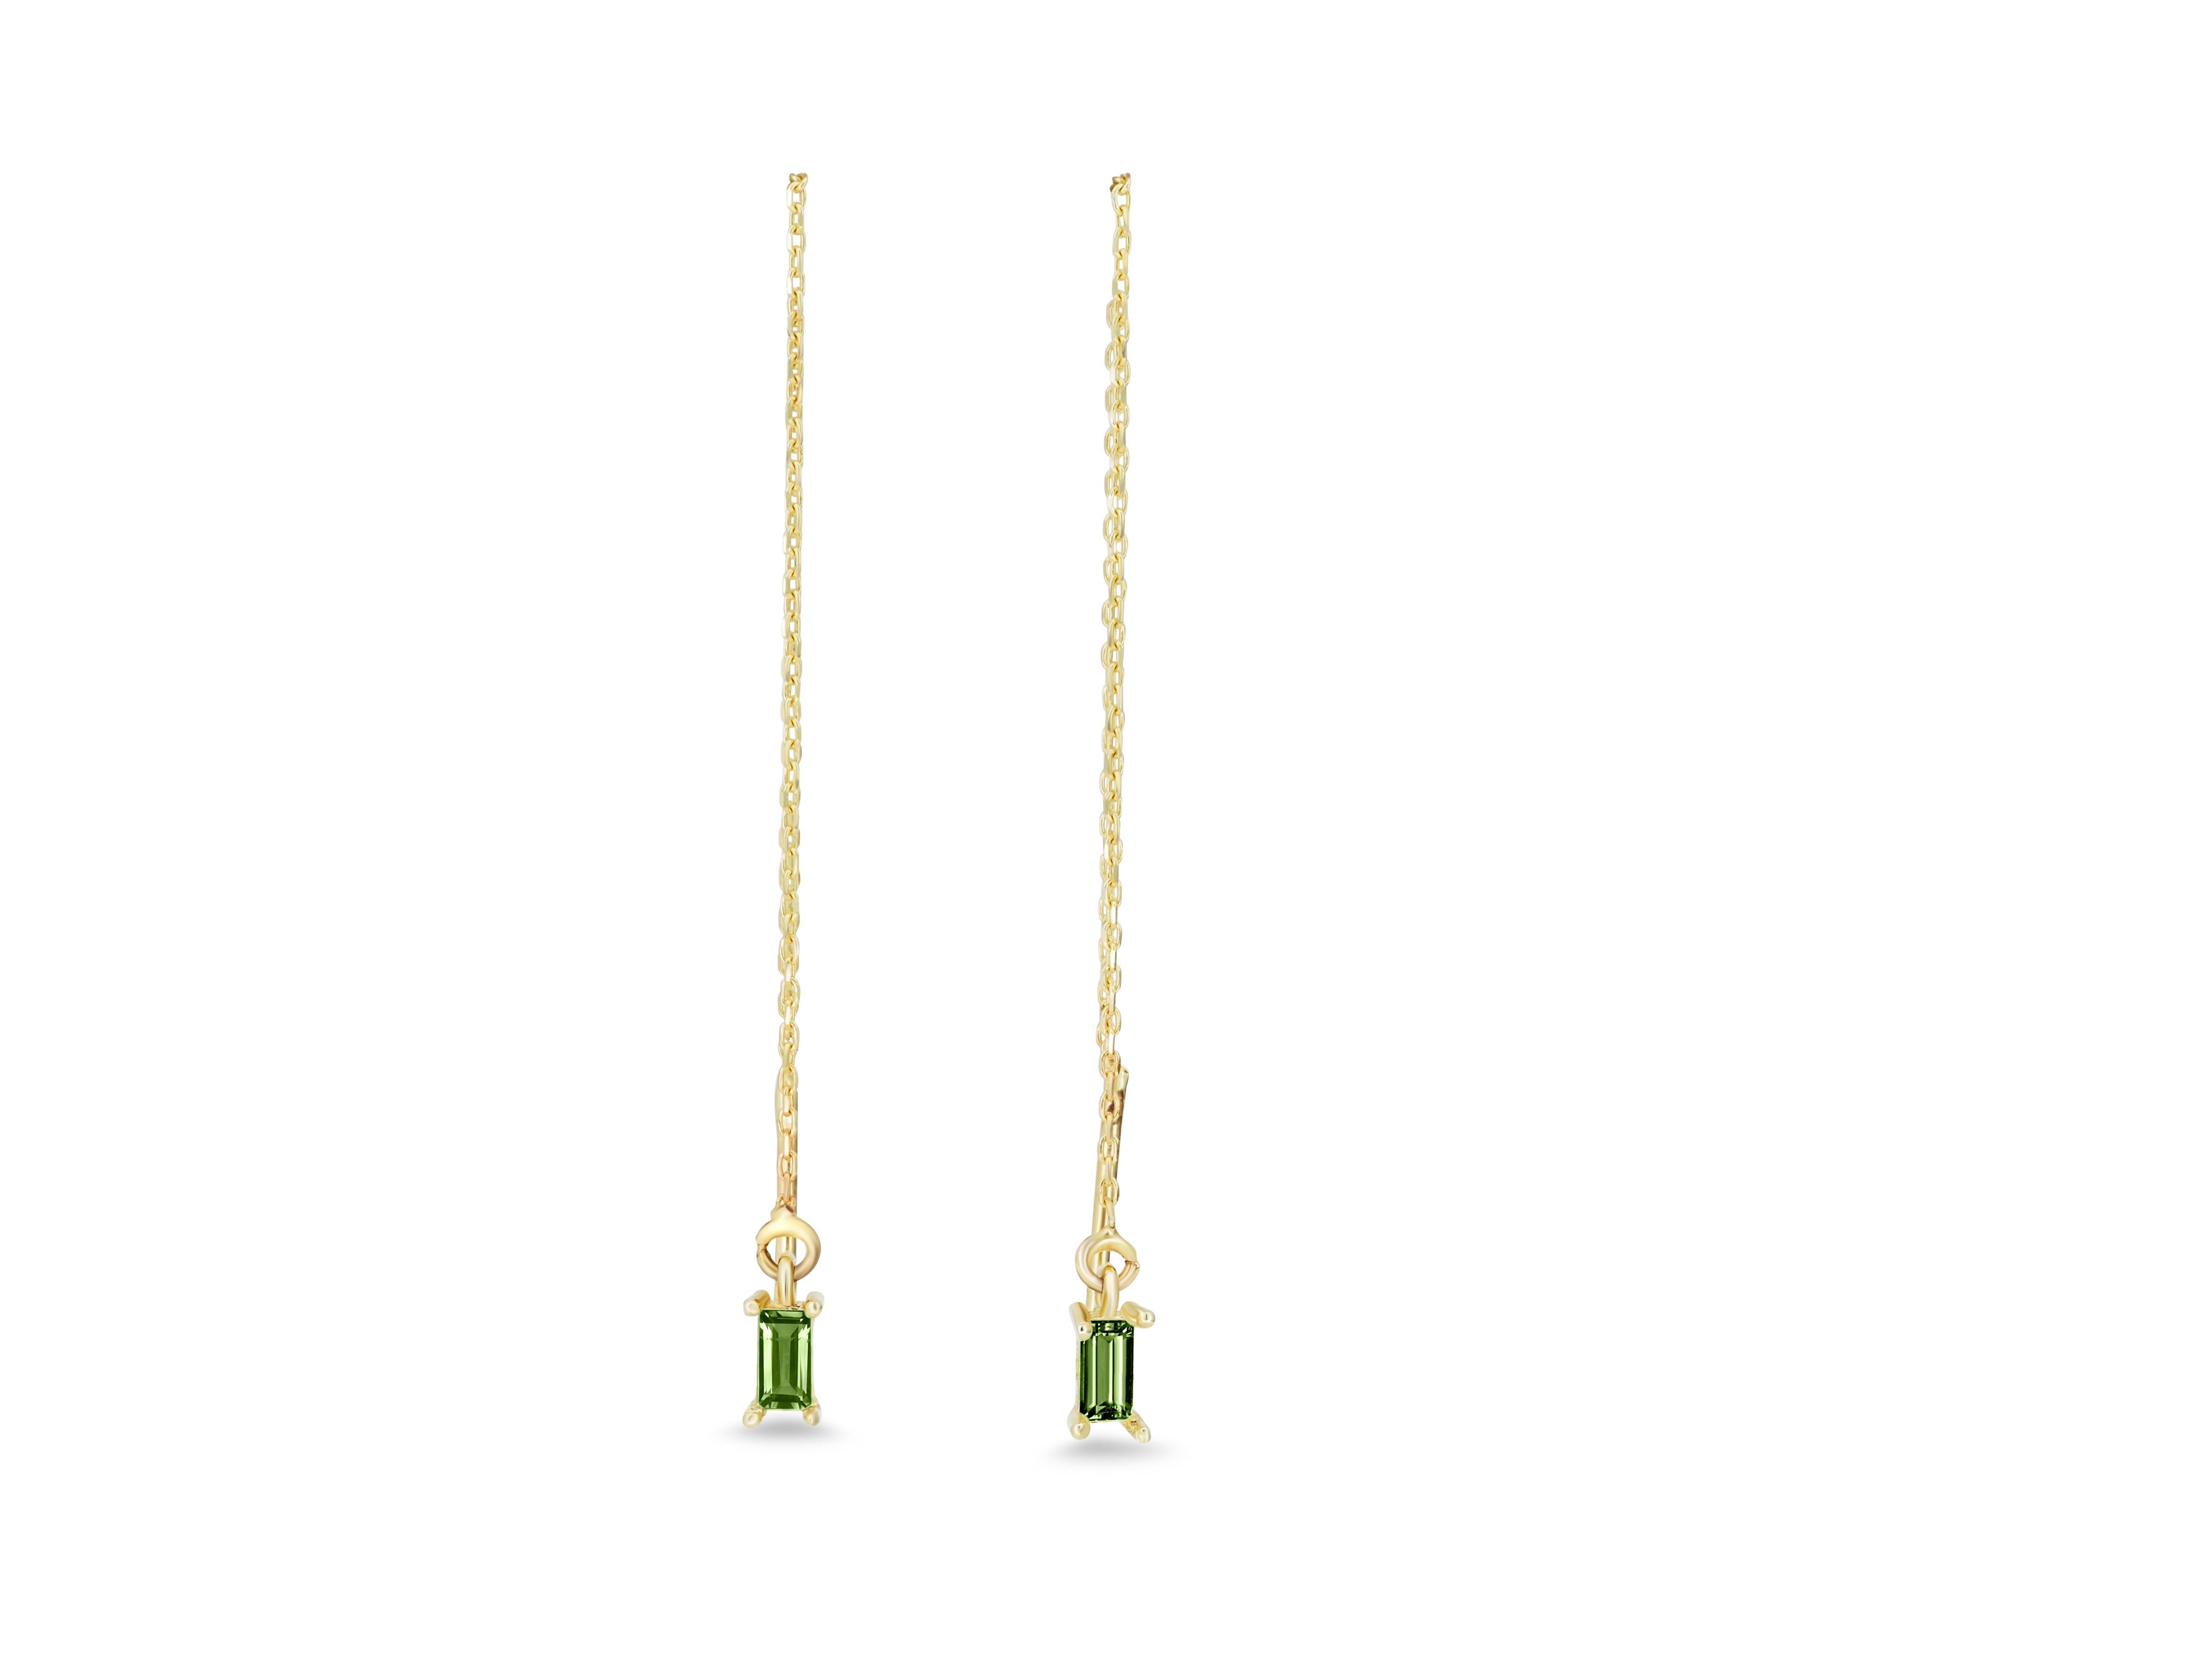 Baguette Cut 14k solid gold drop earrings with peridots.  For Sale